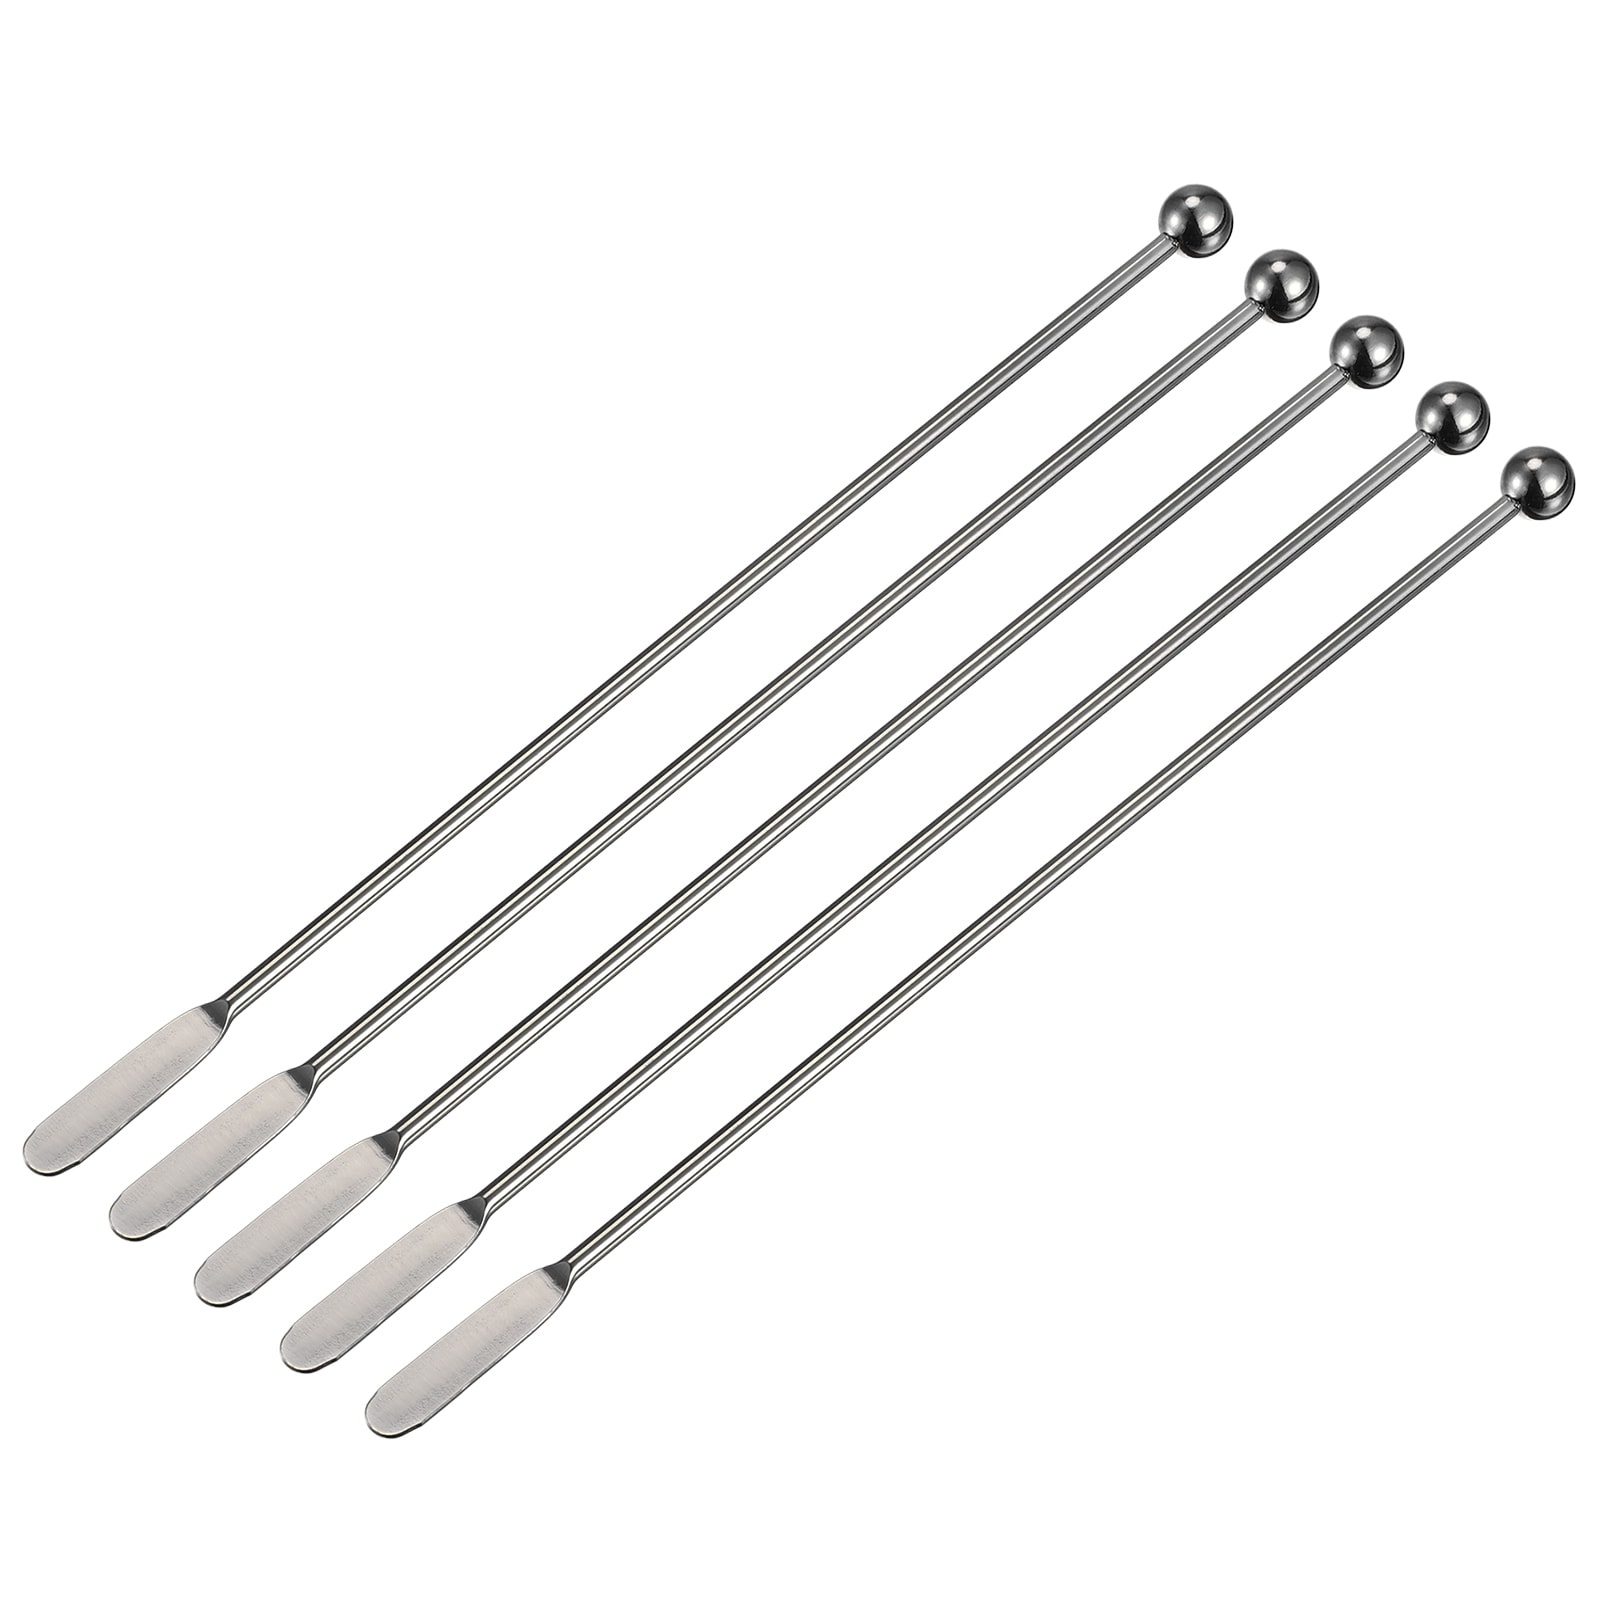 https://ak1.ostkcdn.com/images/products/is/images/direct/976d8ca520528acc5bc92c2386033749922091a2/5pcs-Stainless-Steel-Coffee-Beverage-Stirrer-Cocktail-Drink-Stir-Stick%2C-Silver.jpg